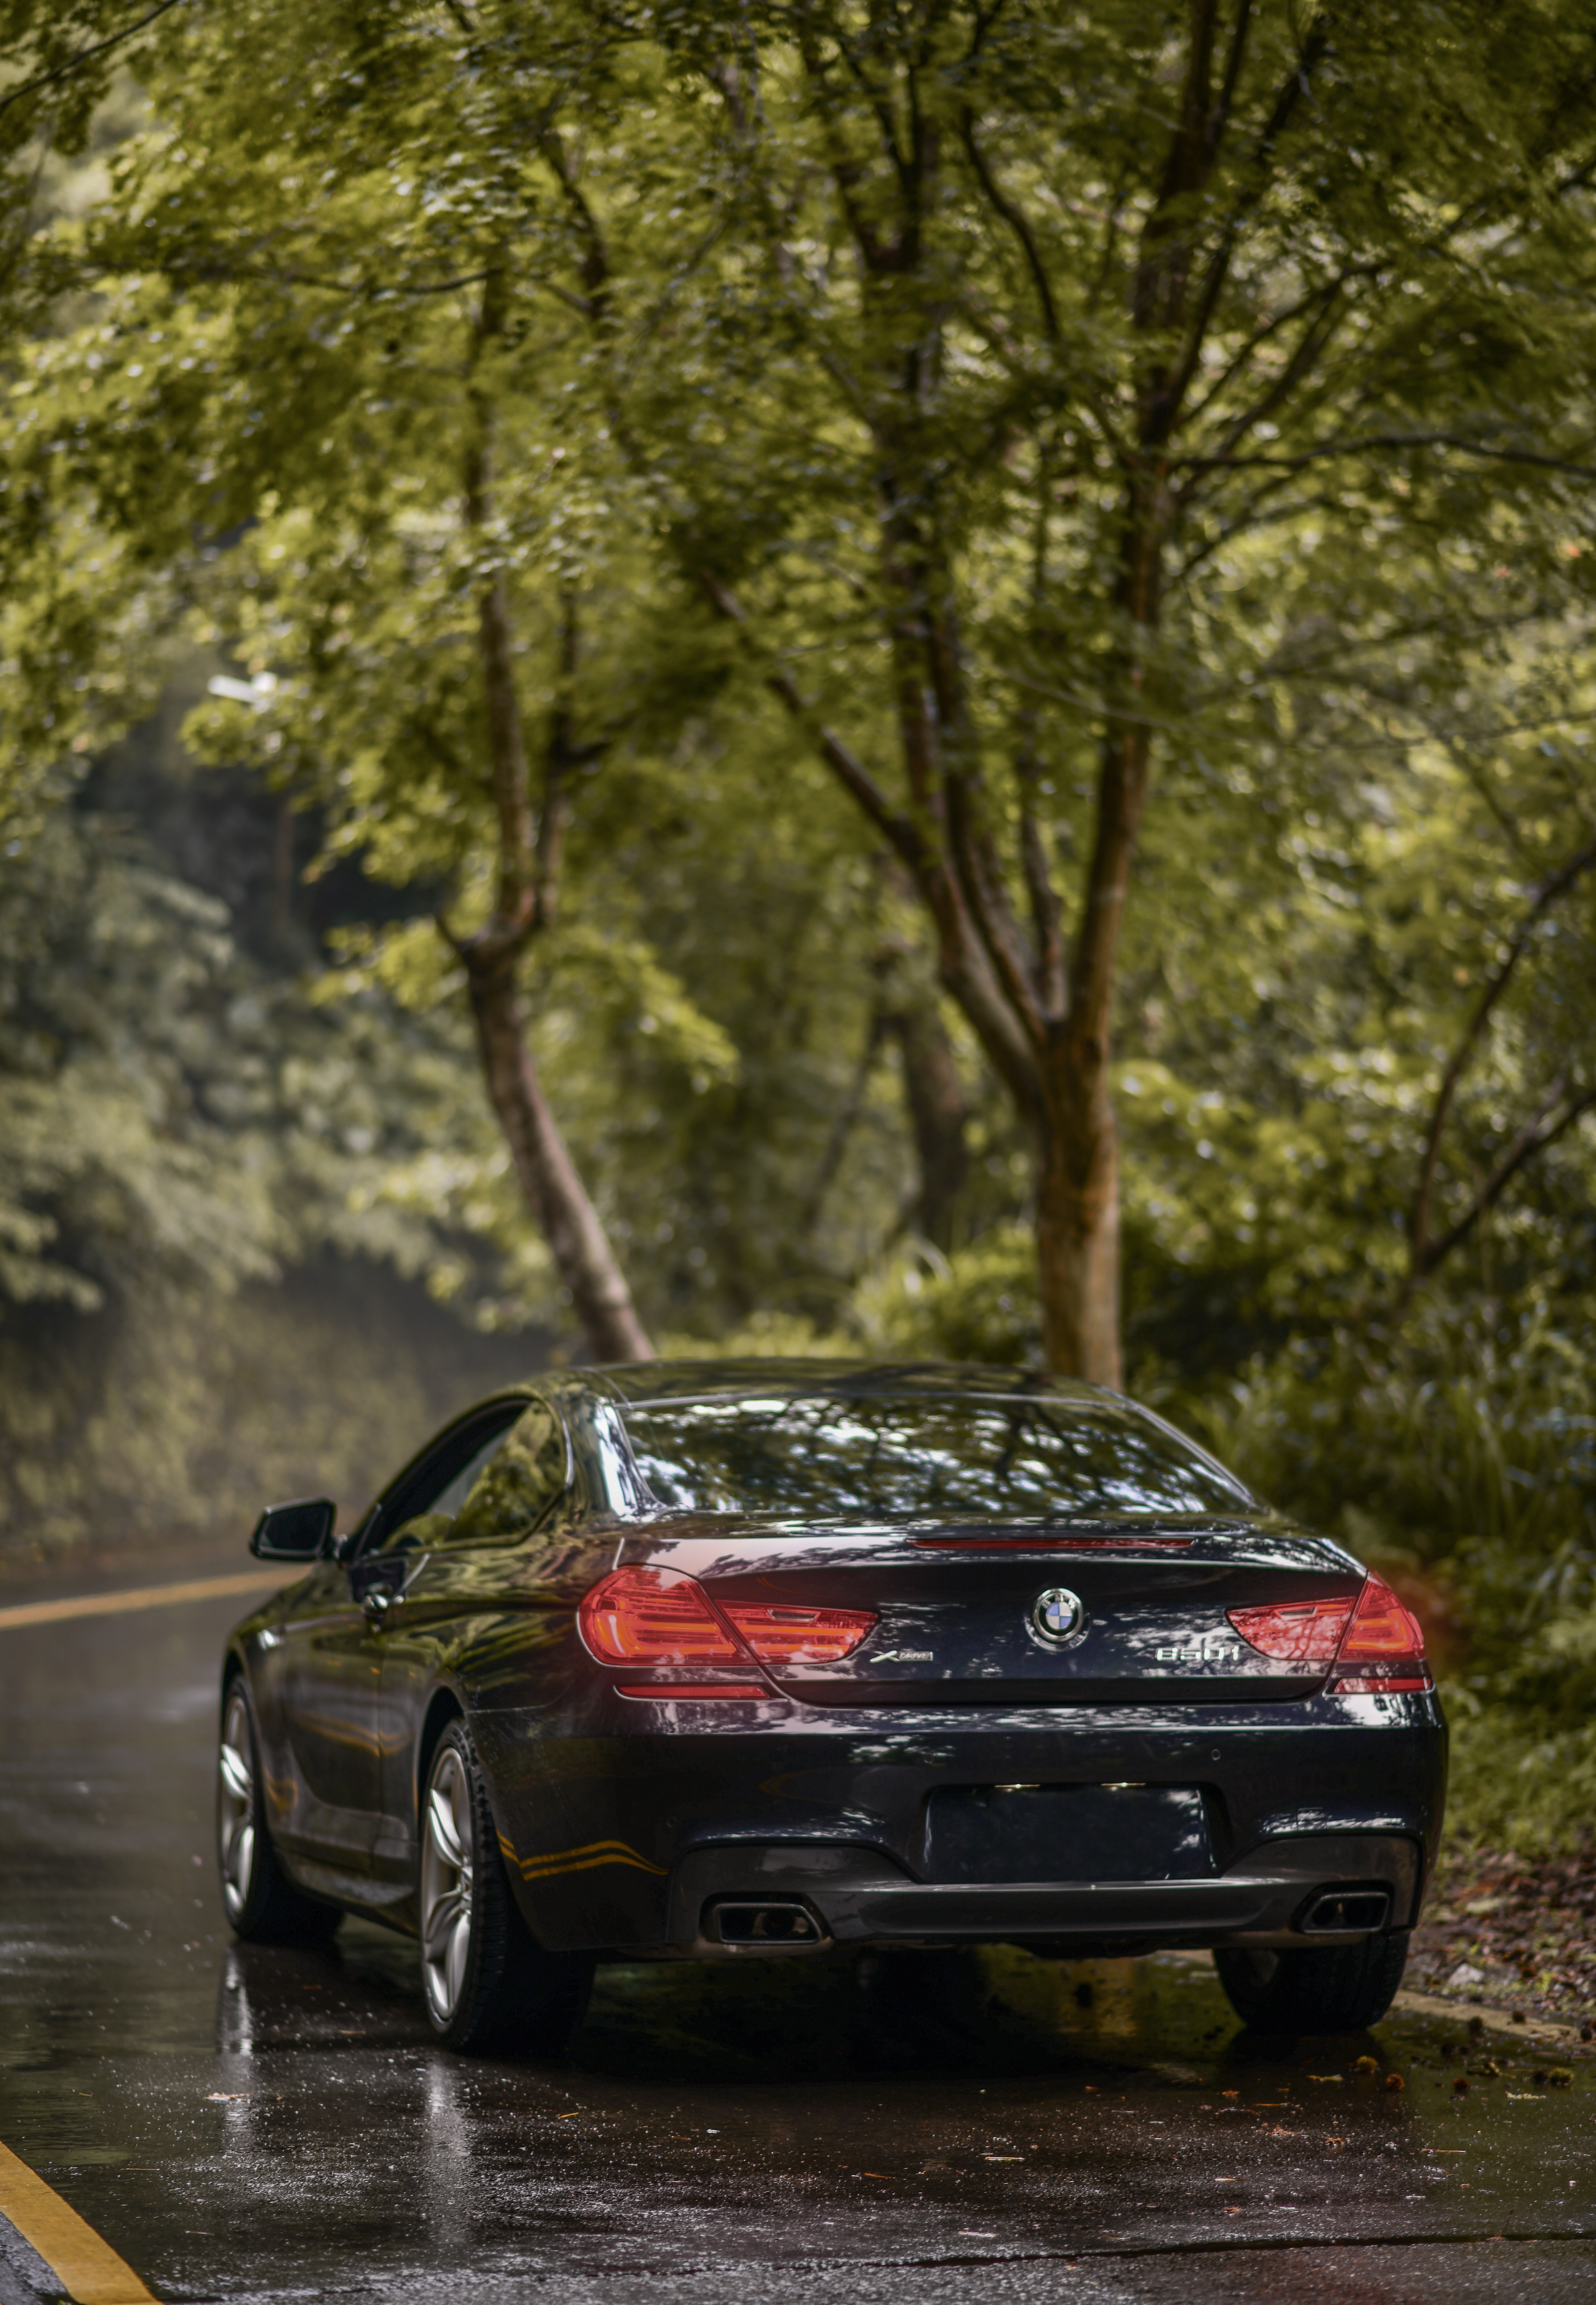 bmw 650i m sport, dark blue, sports, bmw, cars, car, machine, back view, rear view, coupe, compartment, sapphire